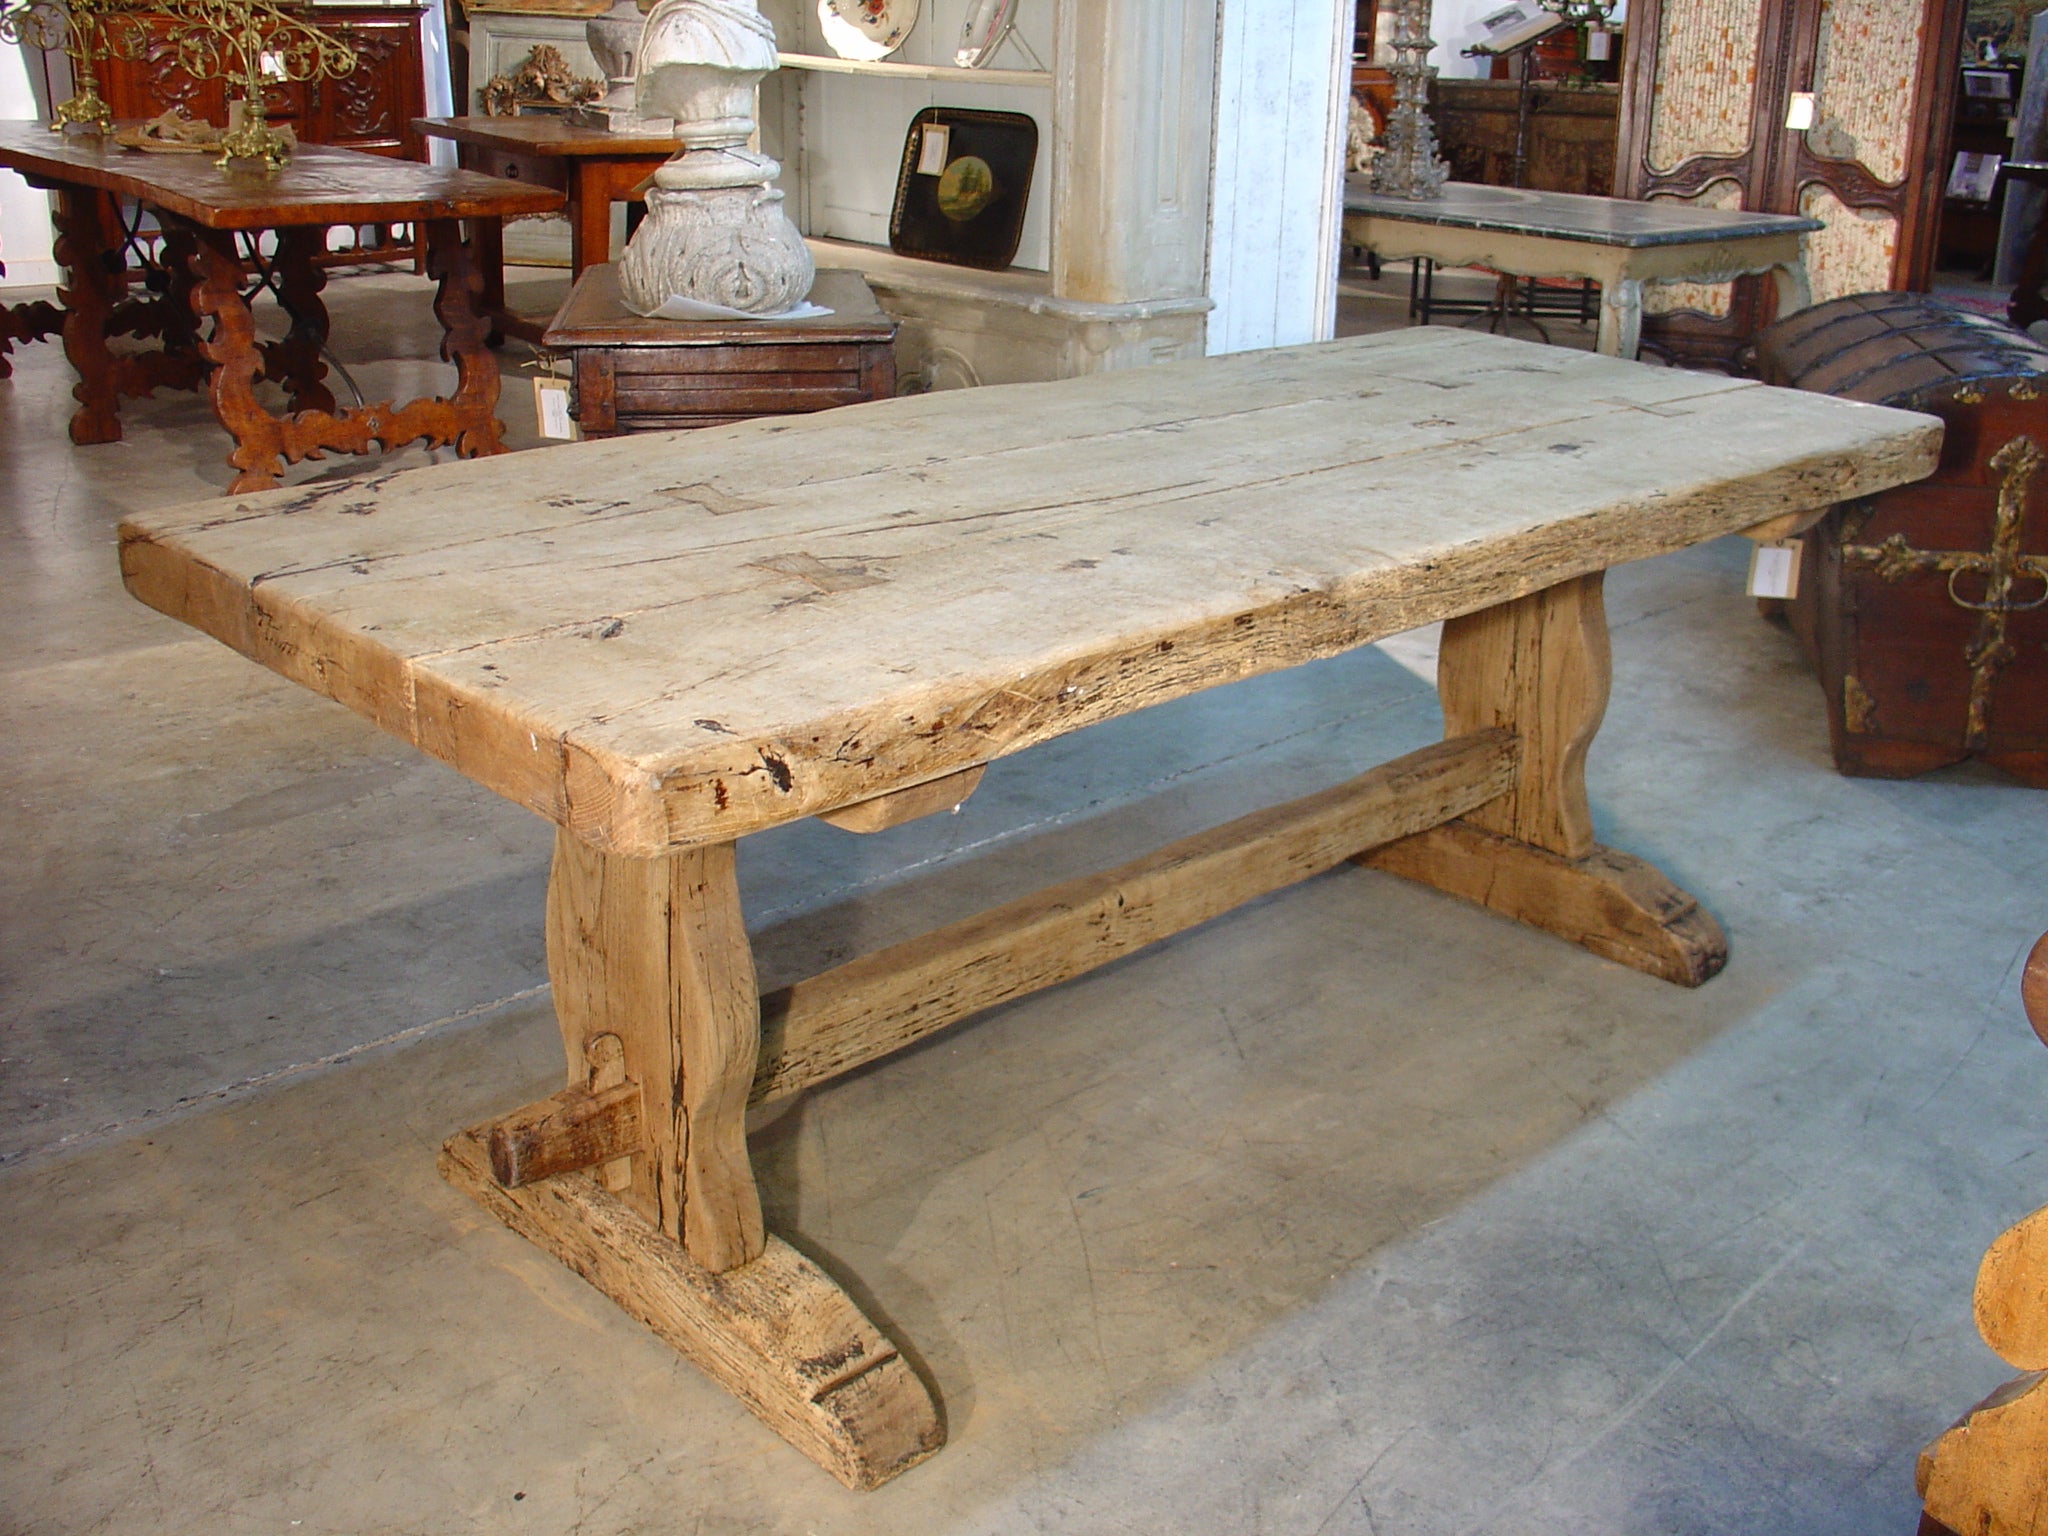 Late 1800s Stripped Oak Table from France